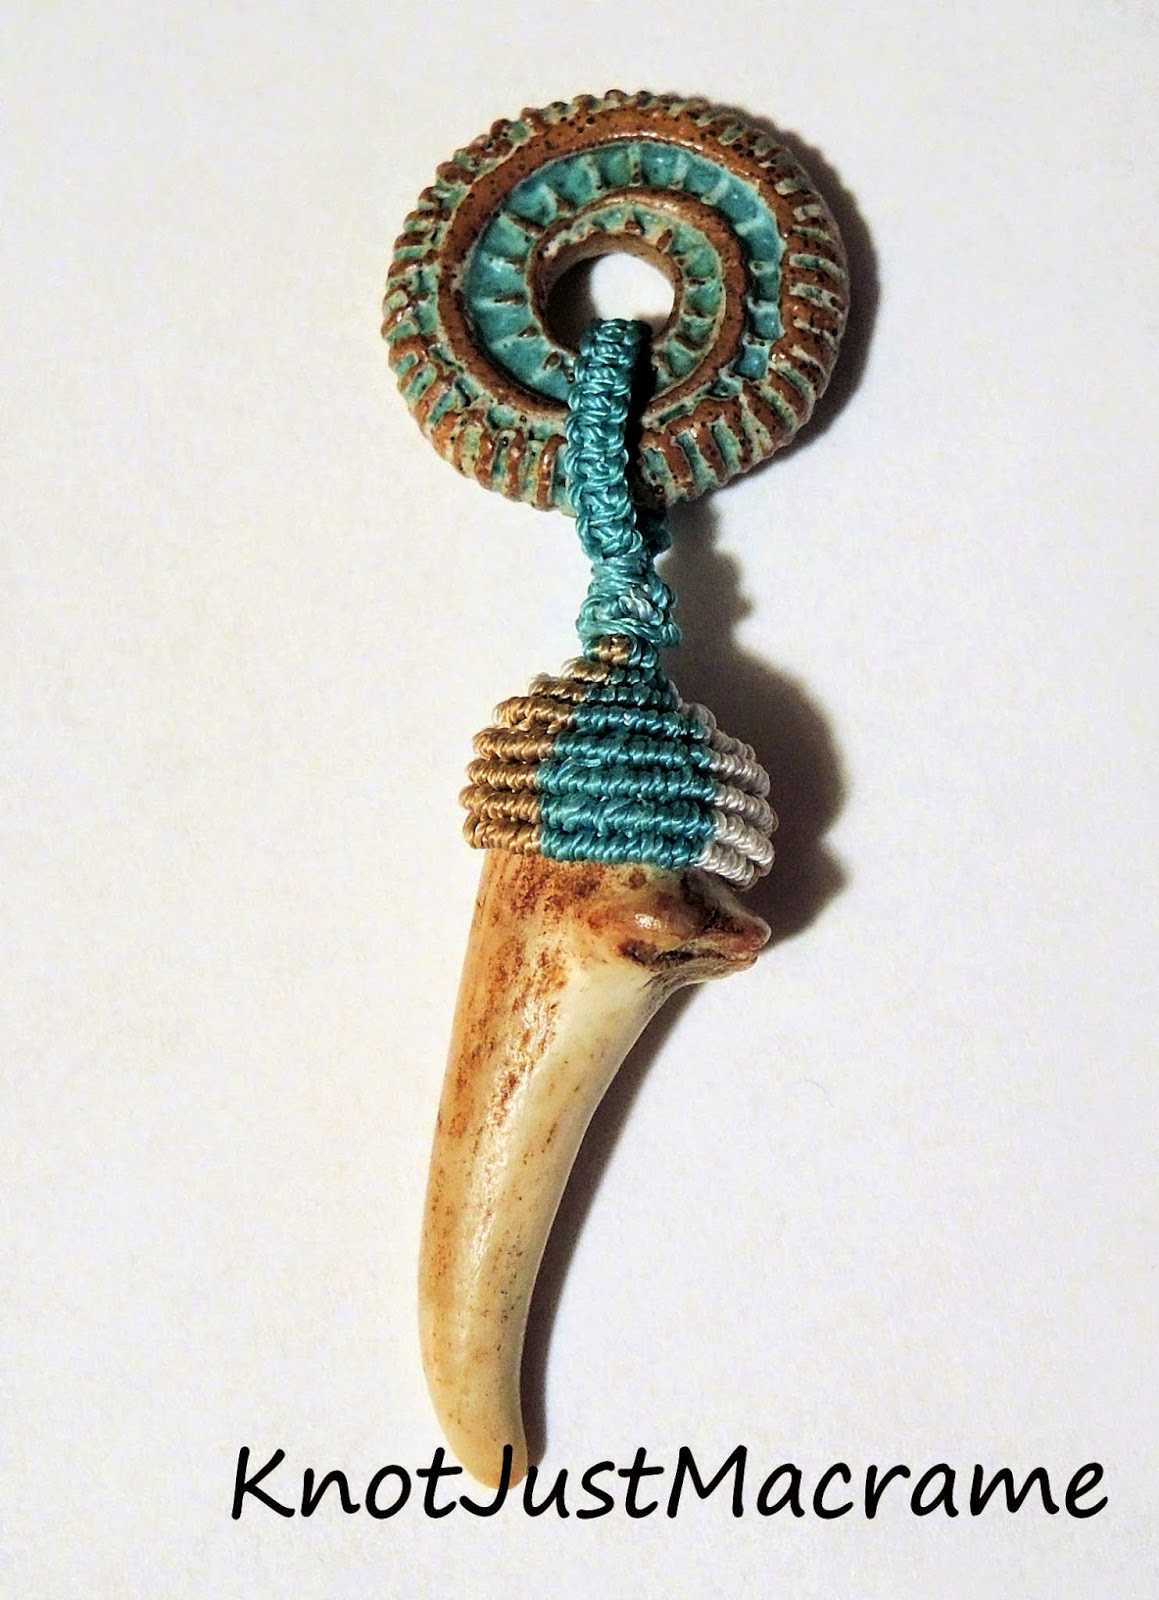 Deer antler tip with macrame knotting attached to a ceramic disc.